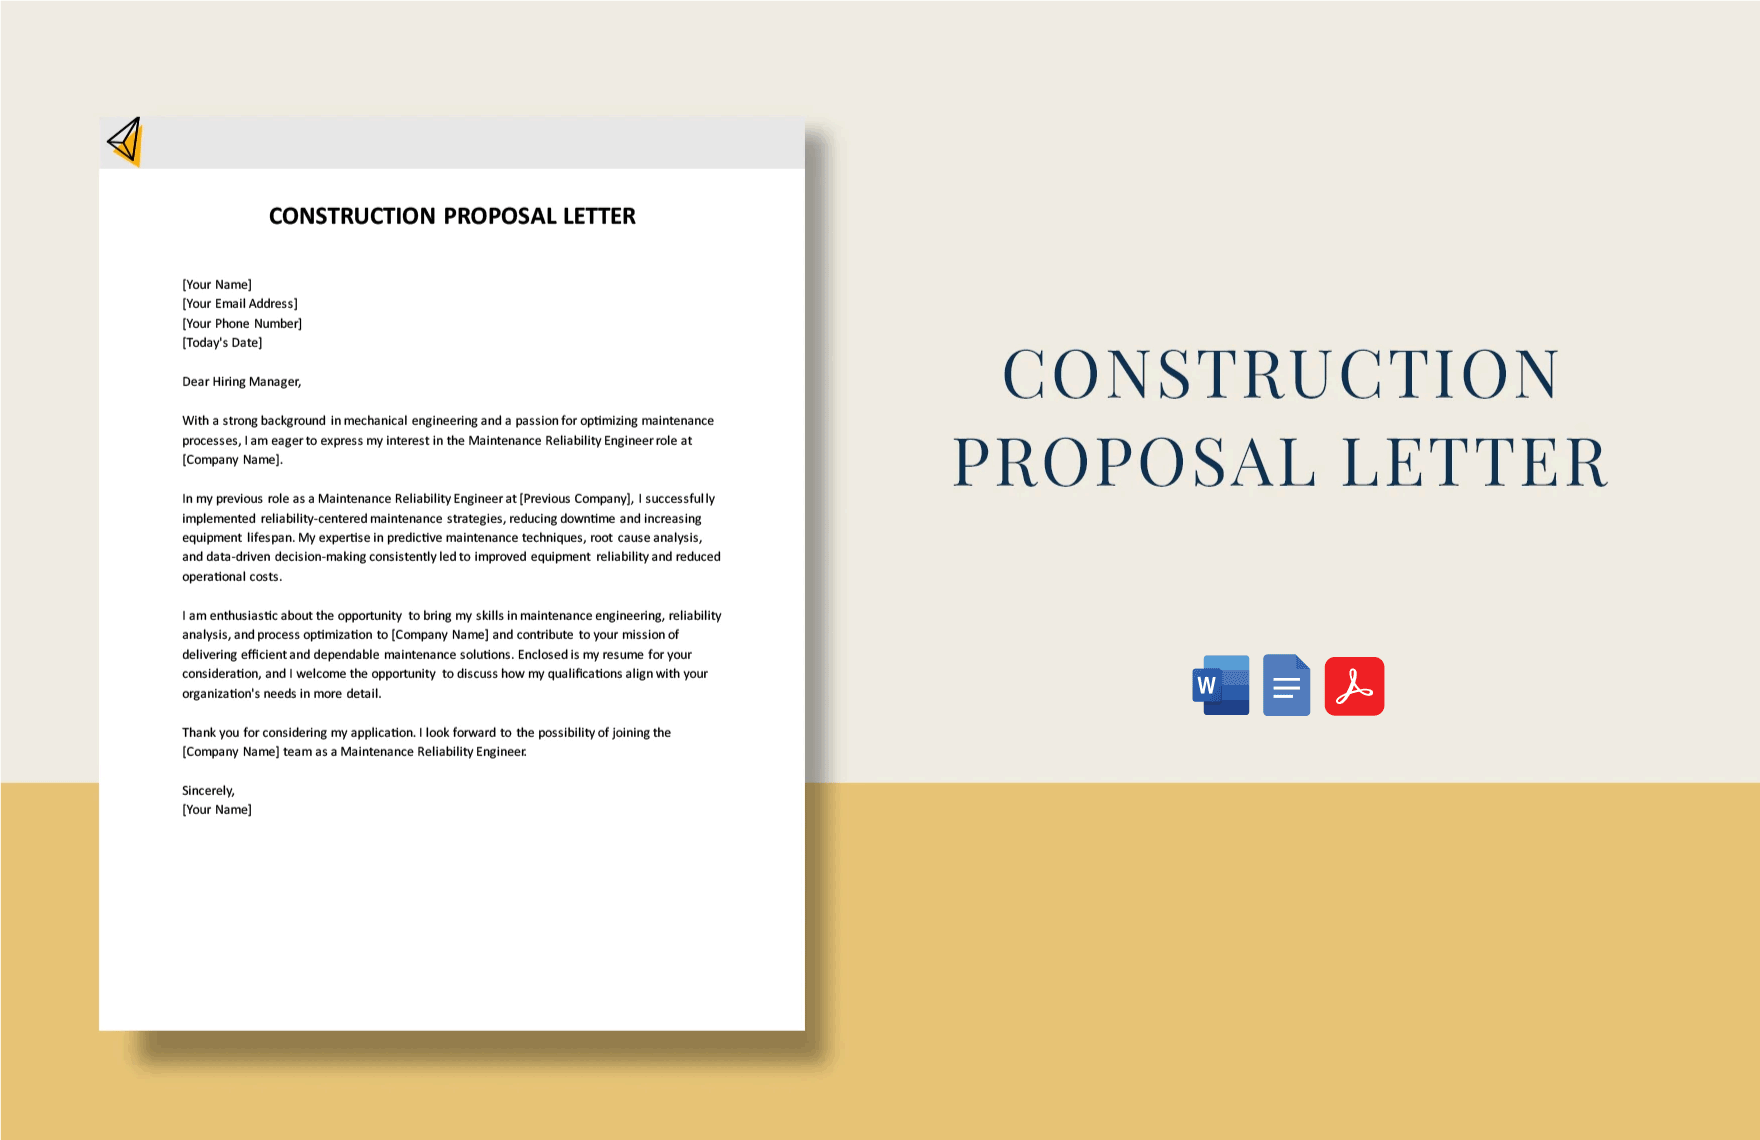 Construction Proposal Letter in Word, Google Docs, PDF